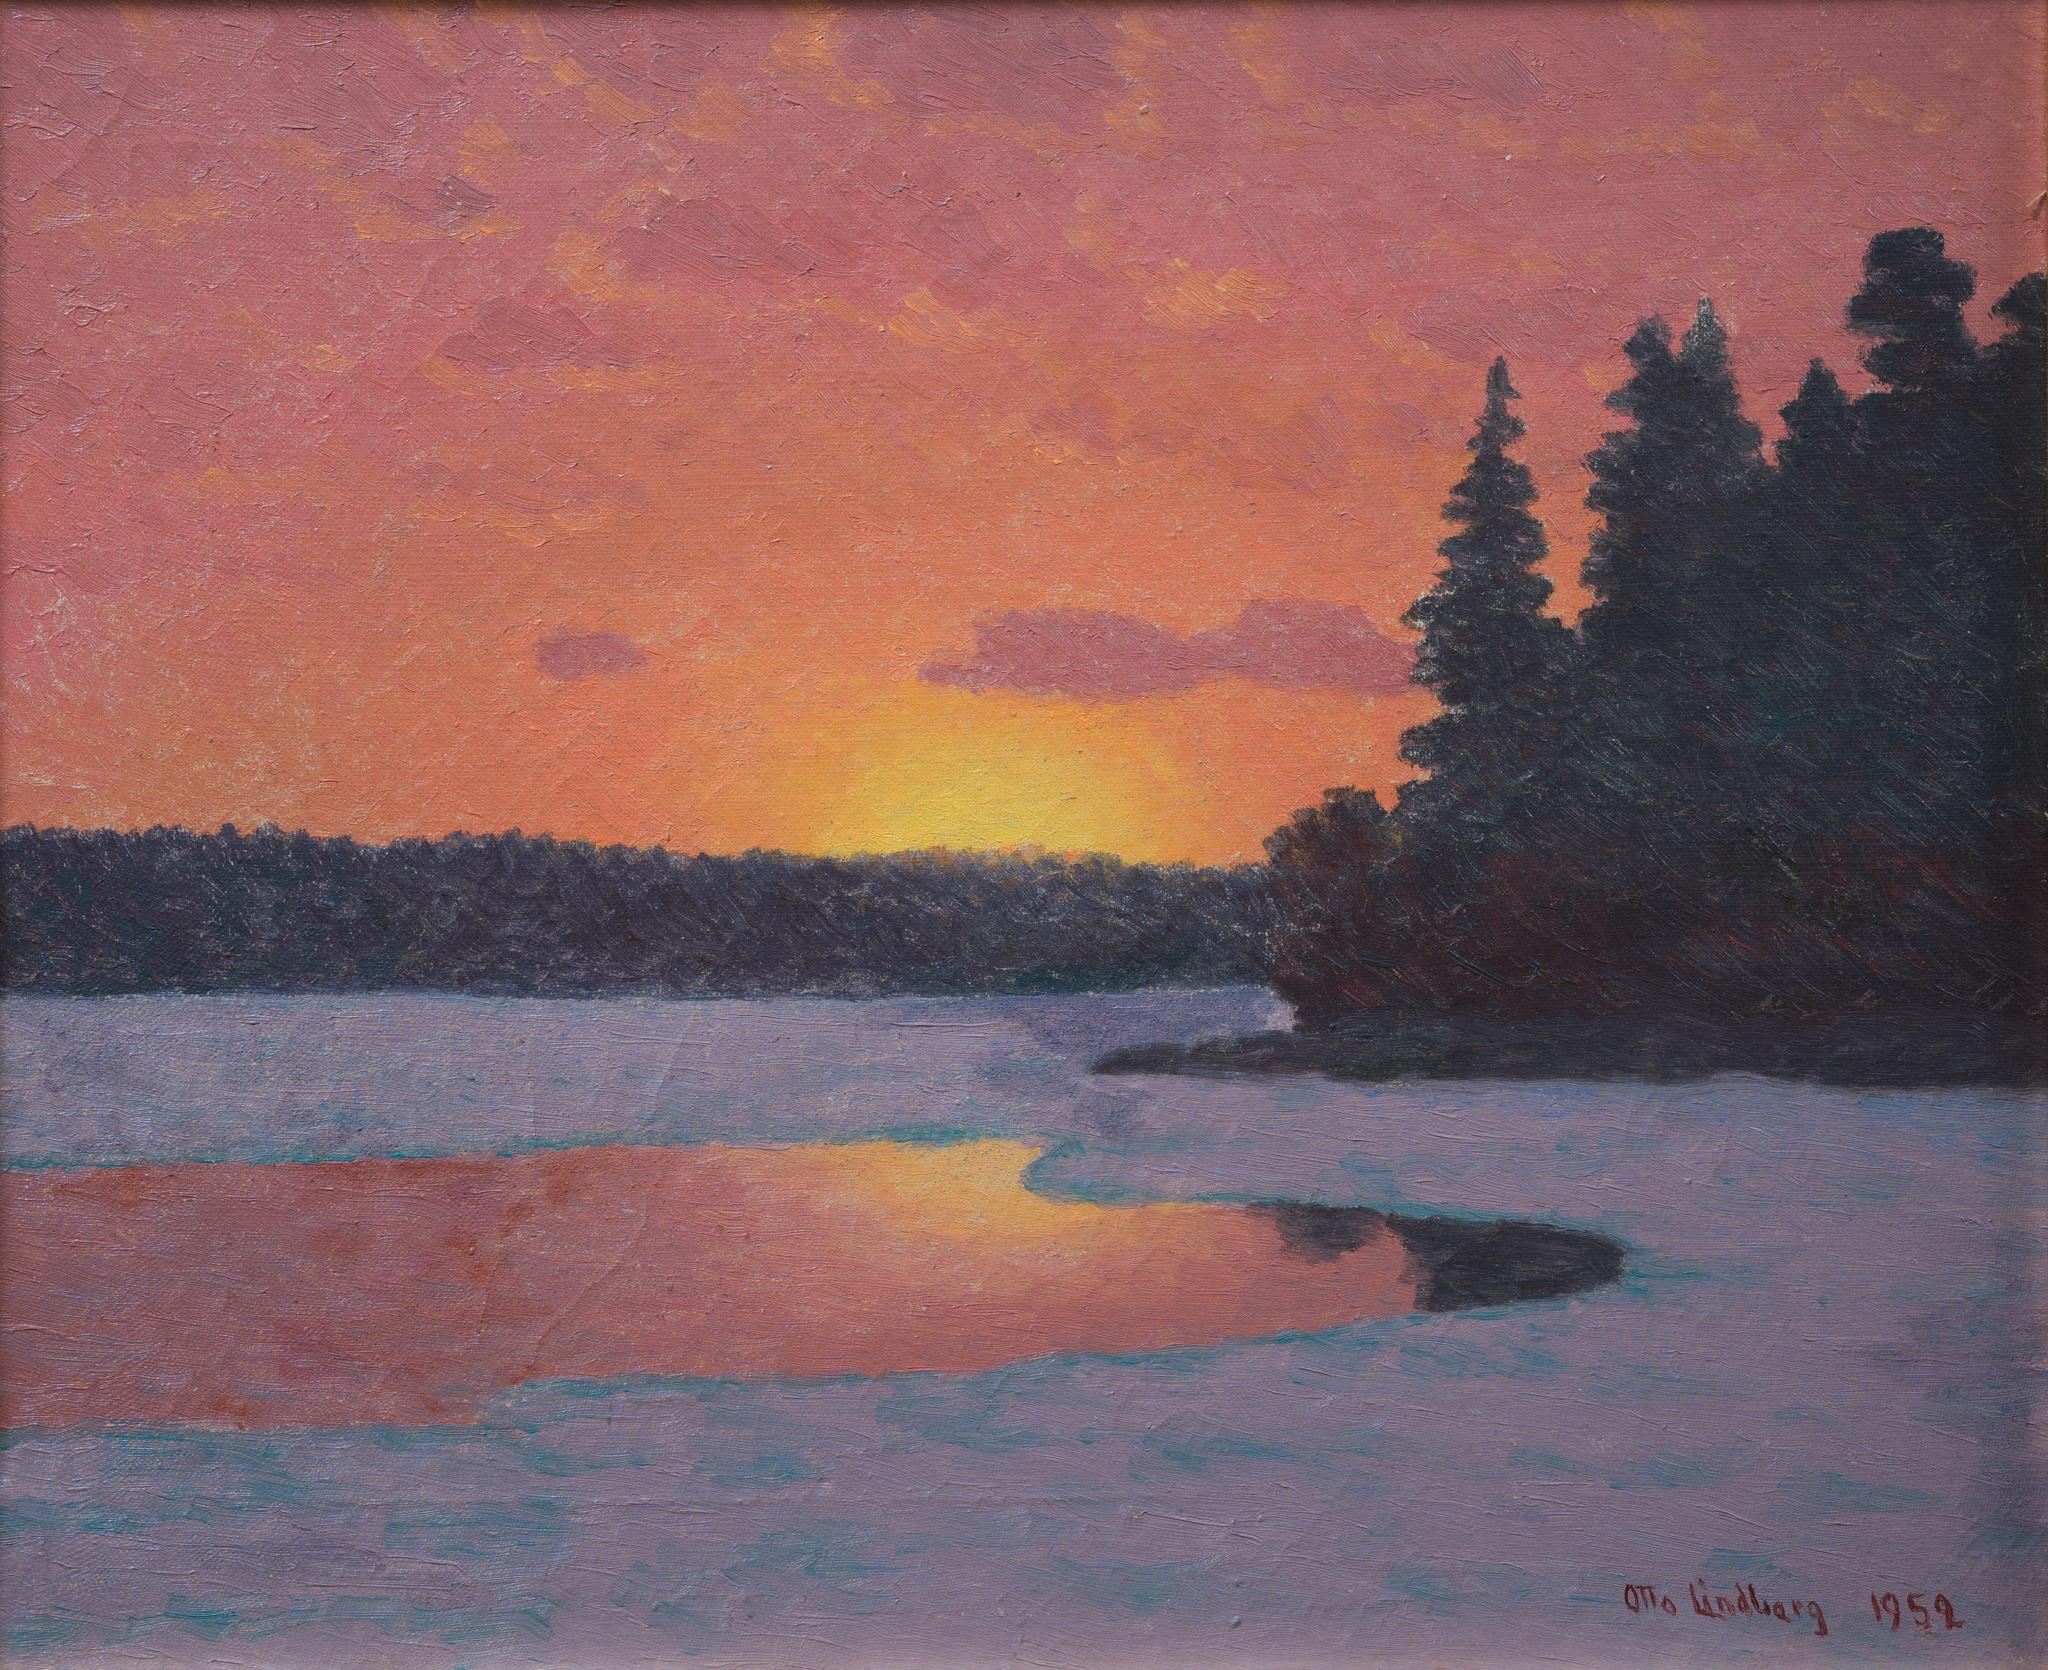 This exquisite painting by the artist Otto Lindberg (1880-1955) is a mesmerizing depiction of a spring sunset. Crafted in 1952, this piece stands as one of Lindberg's final paintings, encapsulating the beauty and transitory nature of life itself.